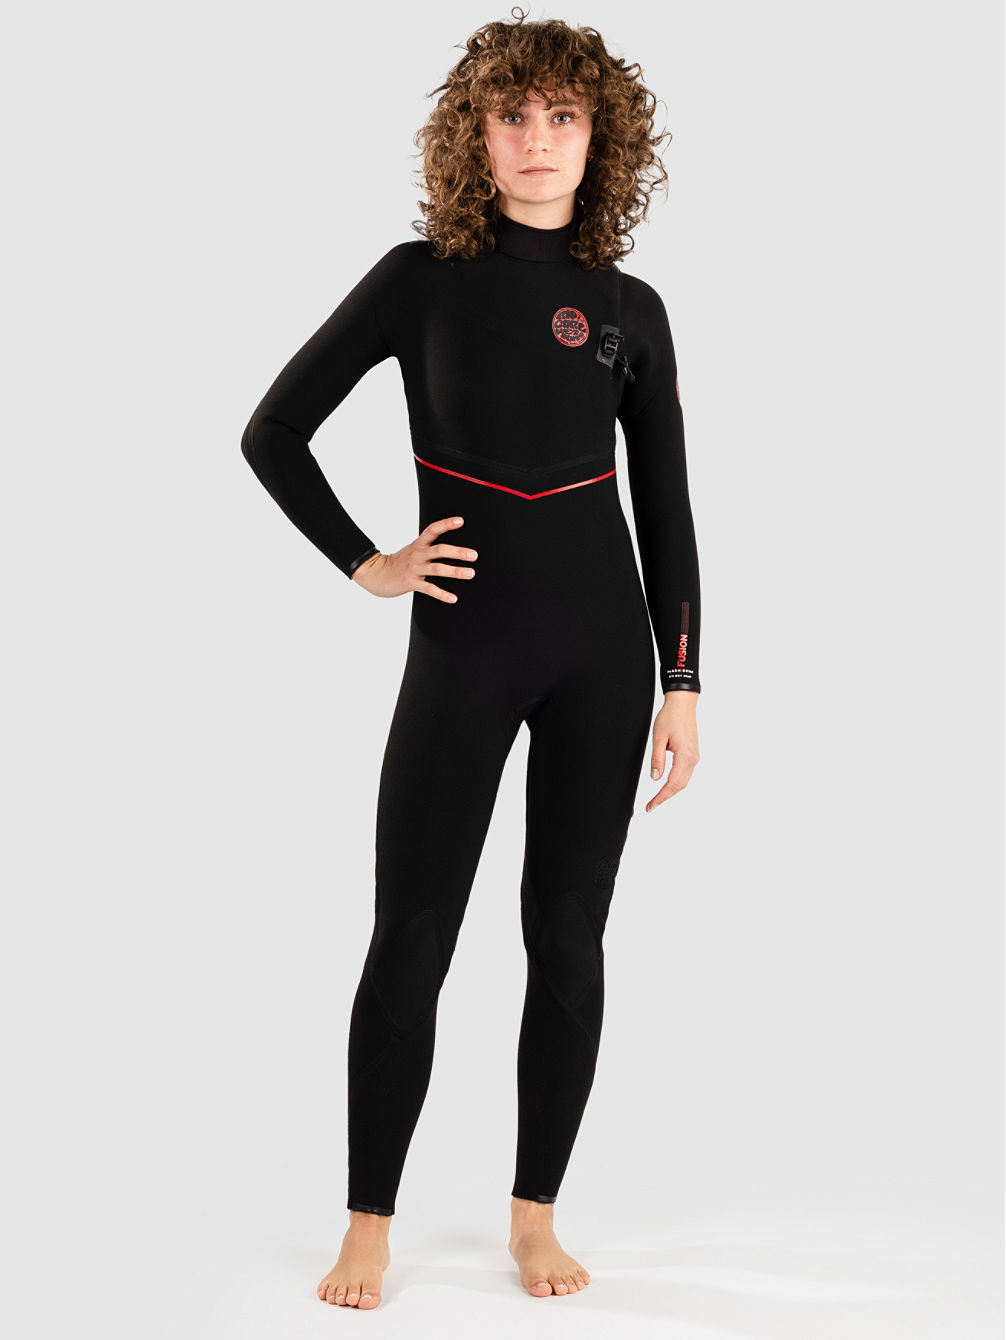 Fbomb Fusion 32Gb Zf Wetsuit